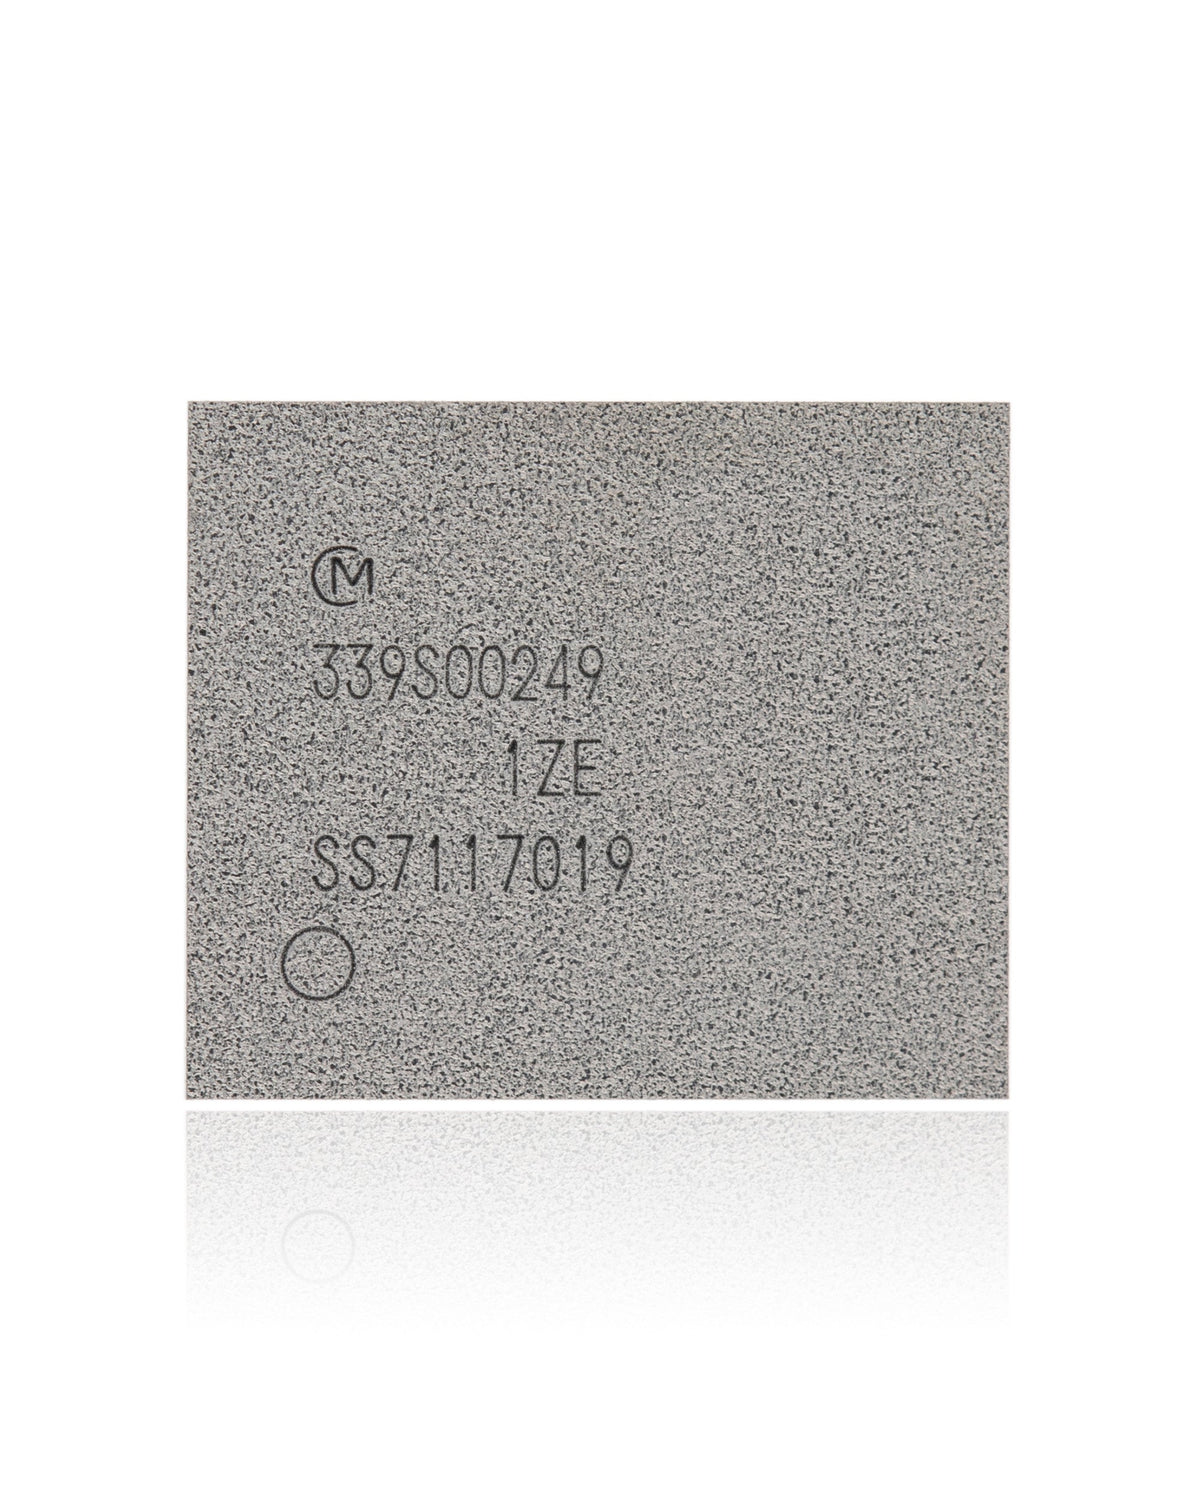 WIFI/BLUETOOTH IC CHIP FOR IPAD PRO 12.9" 2ND GEN (2017) (339S00249 / 339S00308)